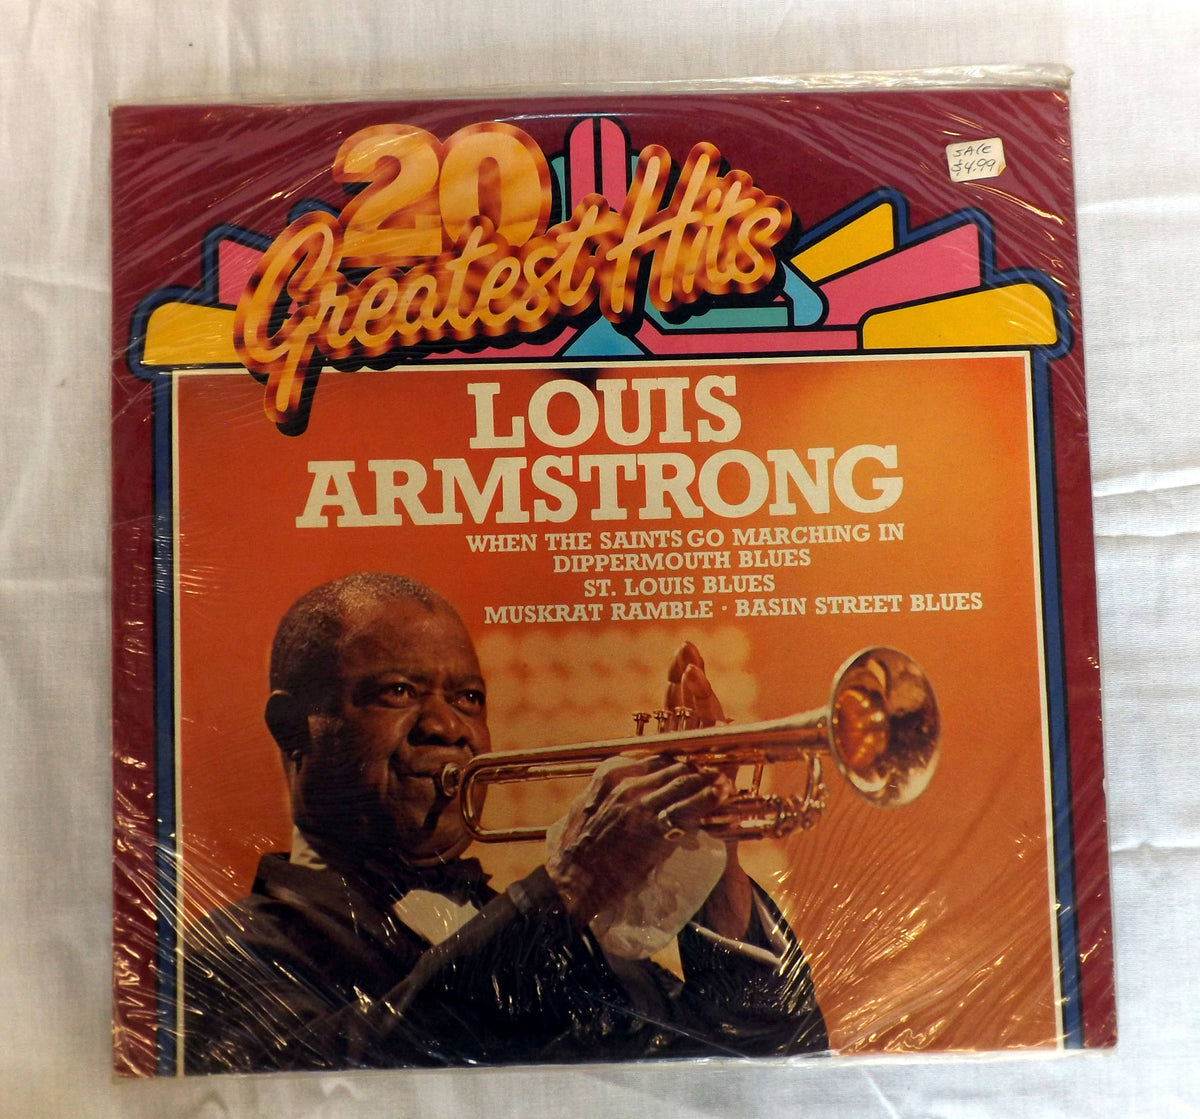 Greatest Hits Louis Armstrong LP